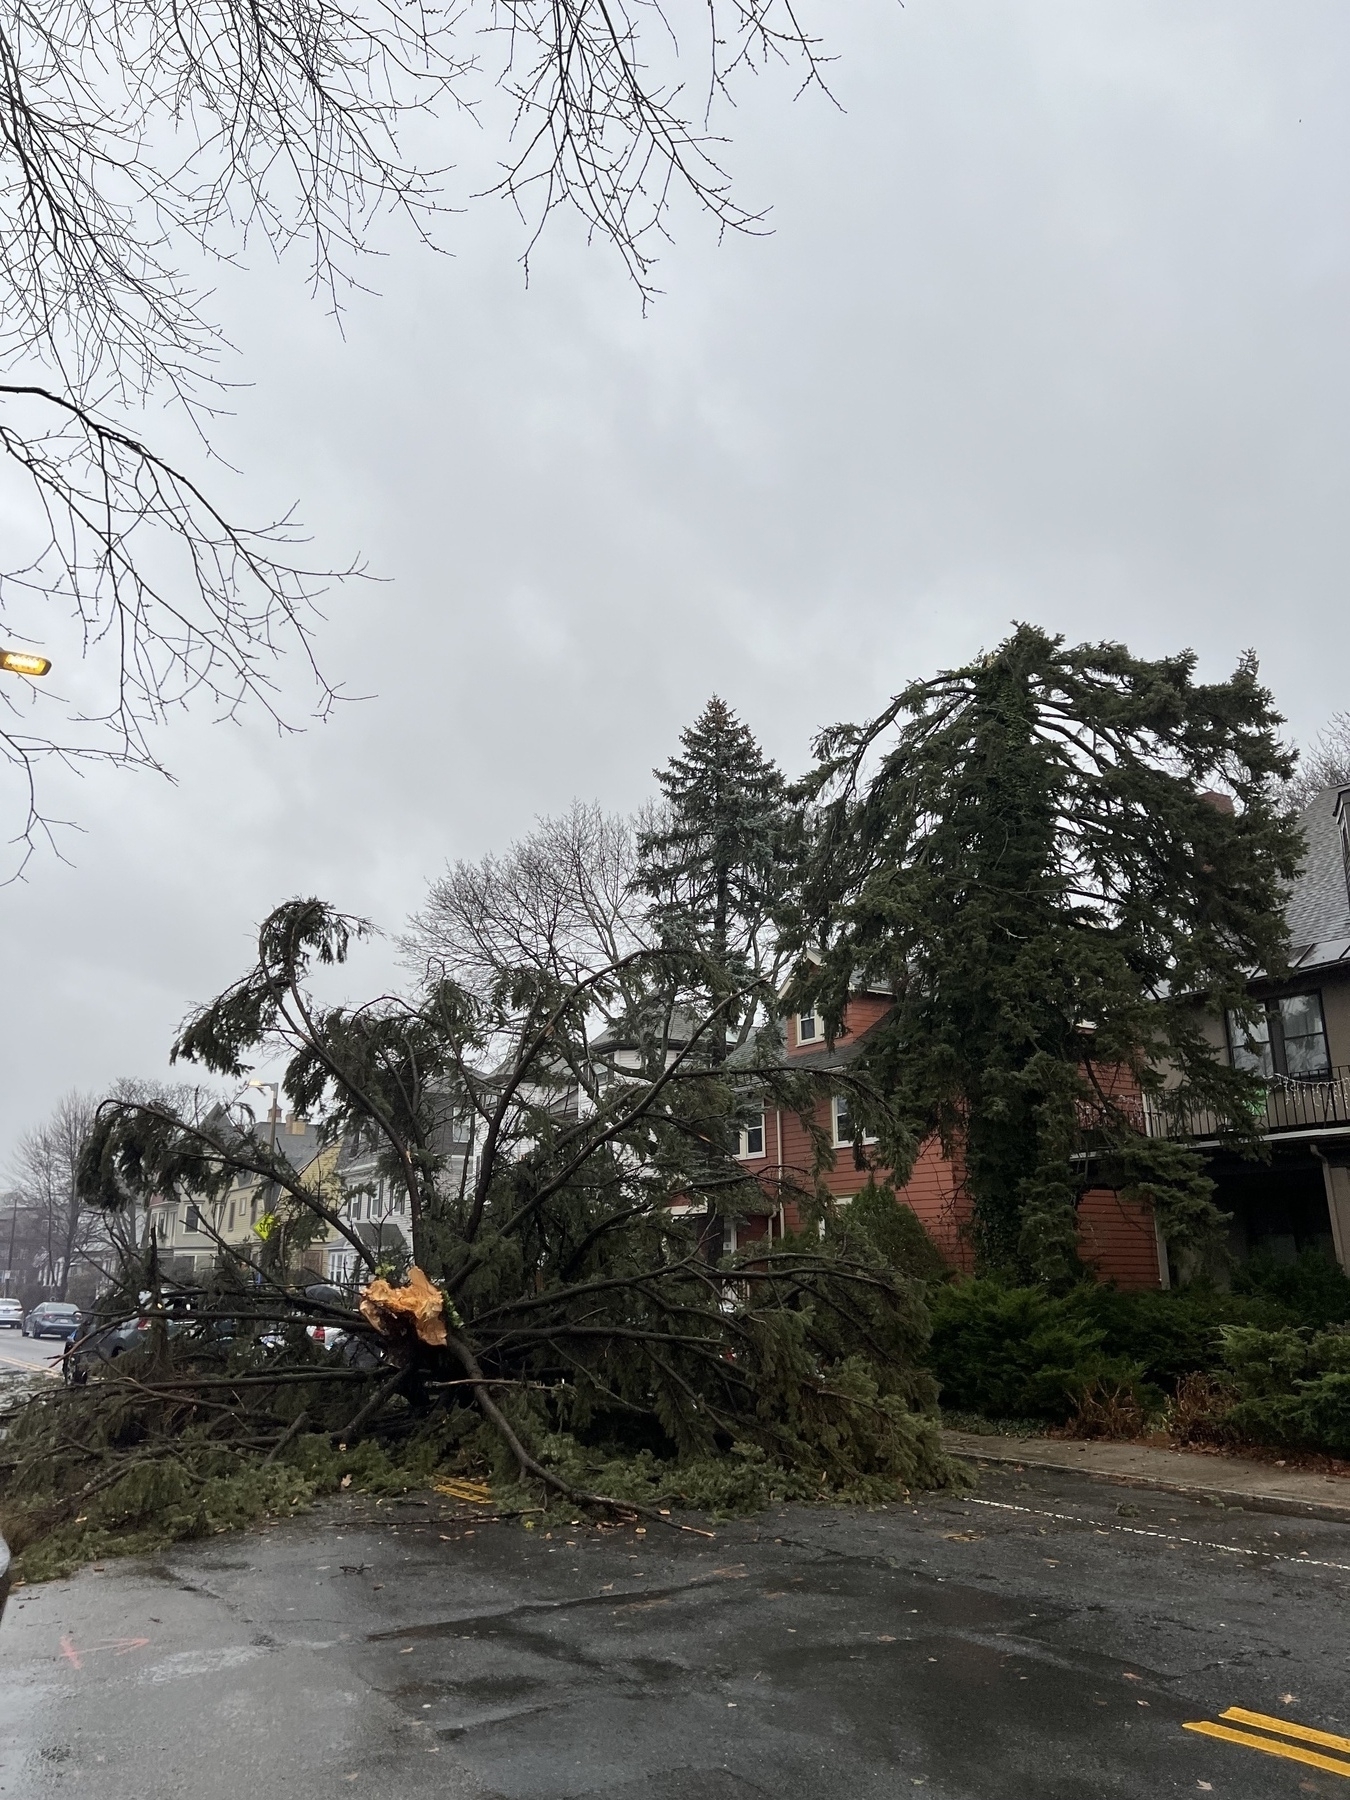 The top half of a tall pine tree lies in a street, having snapped off during a windy rainstorm.